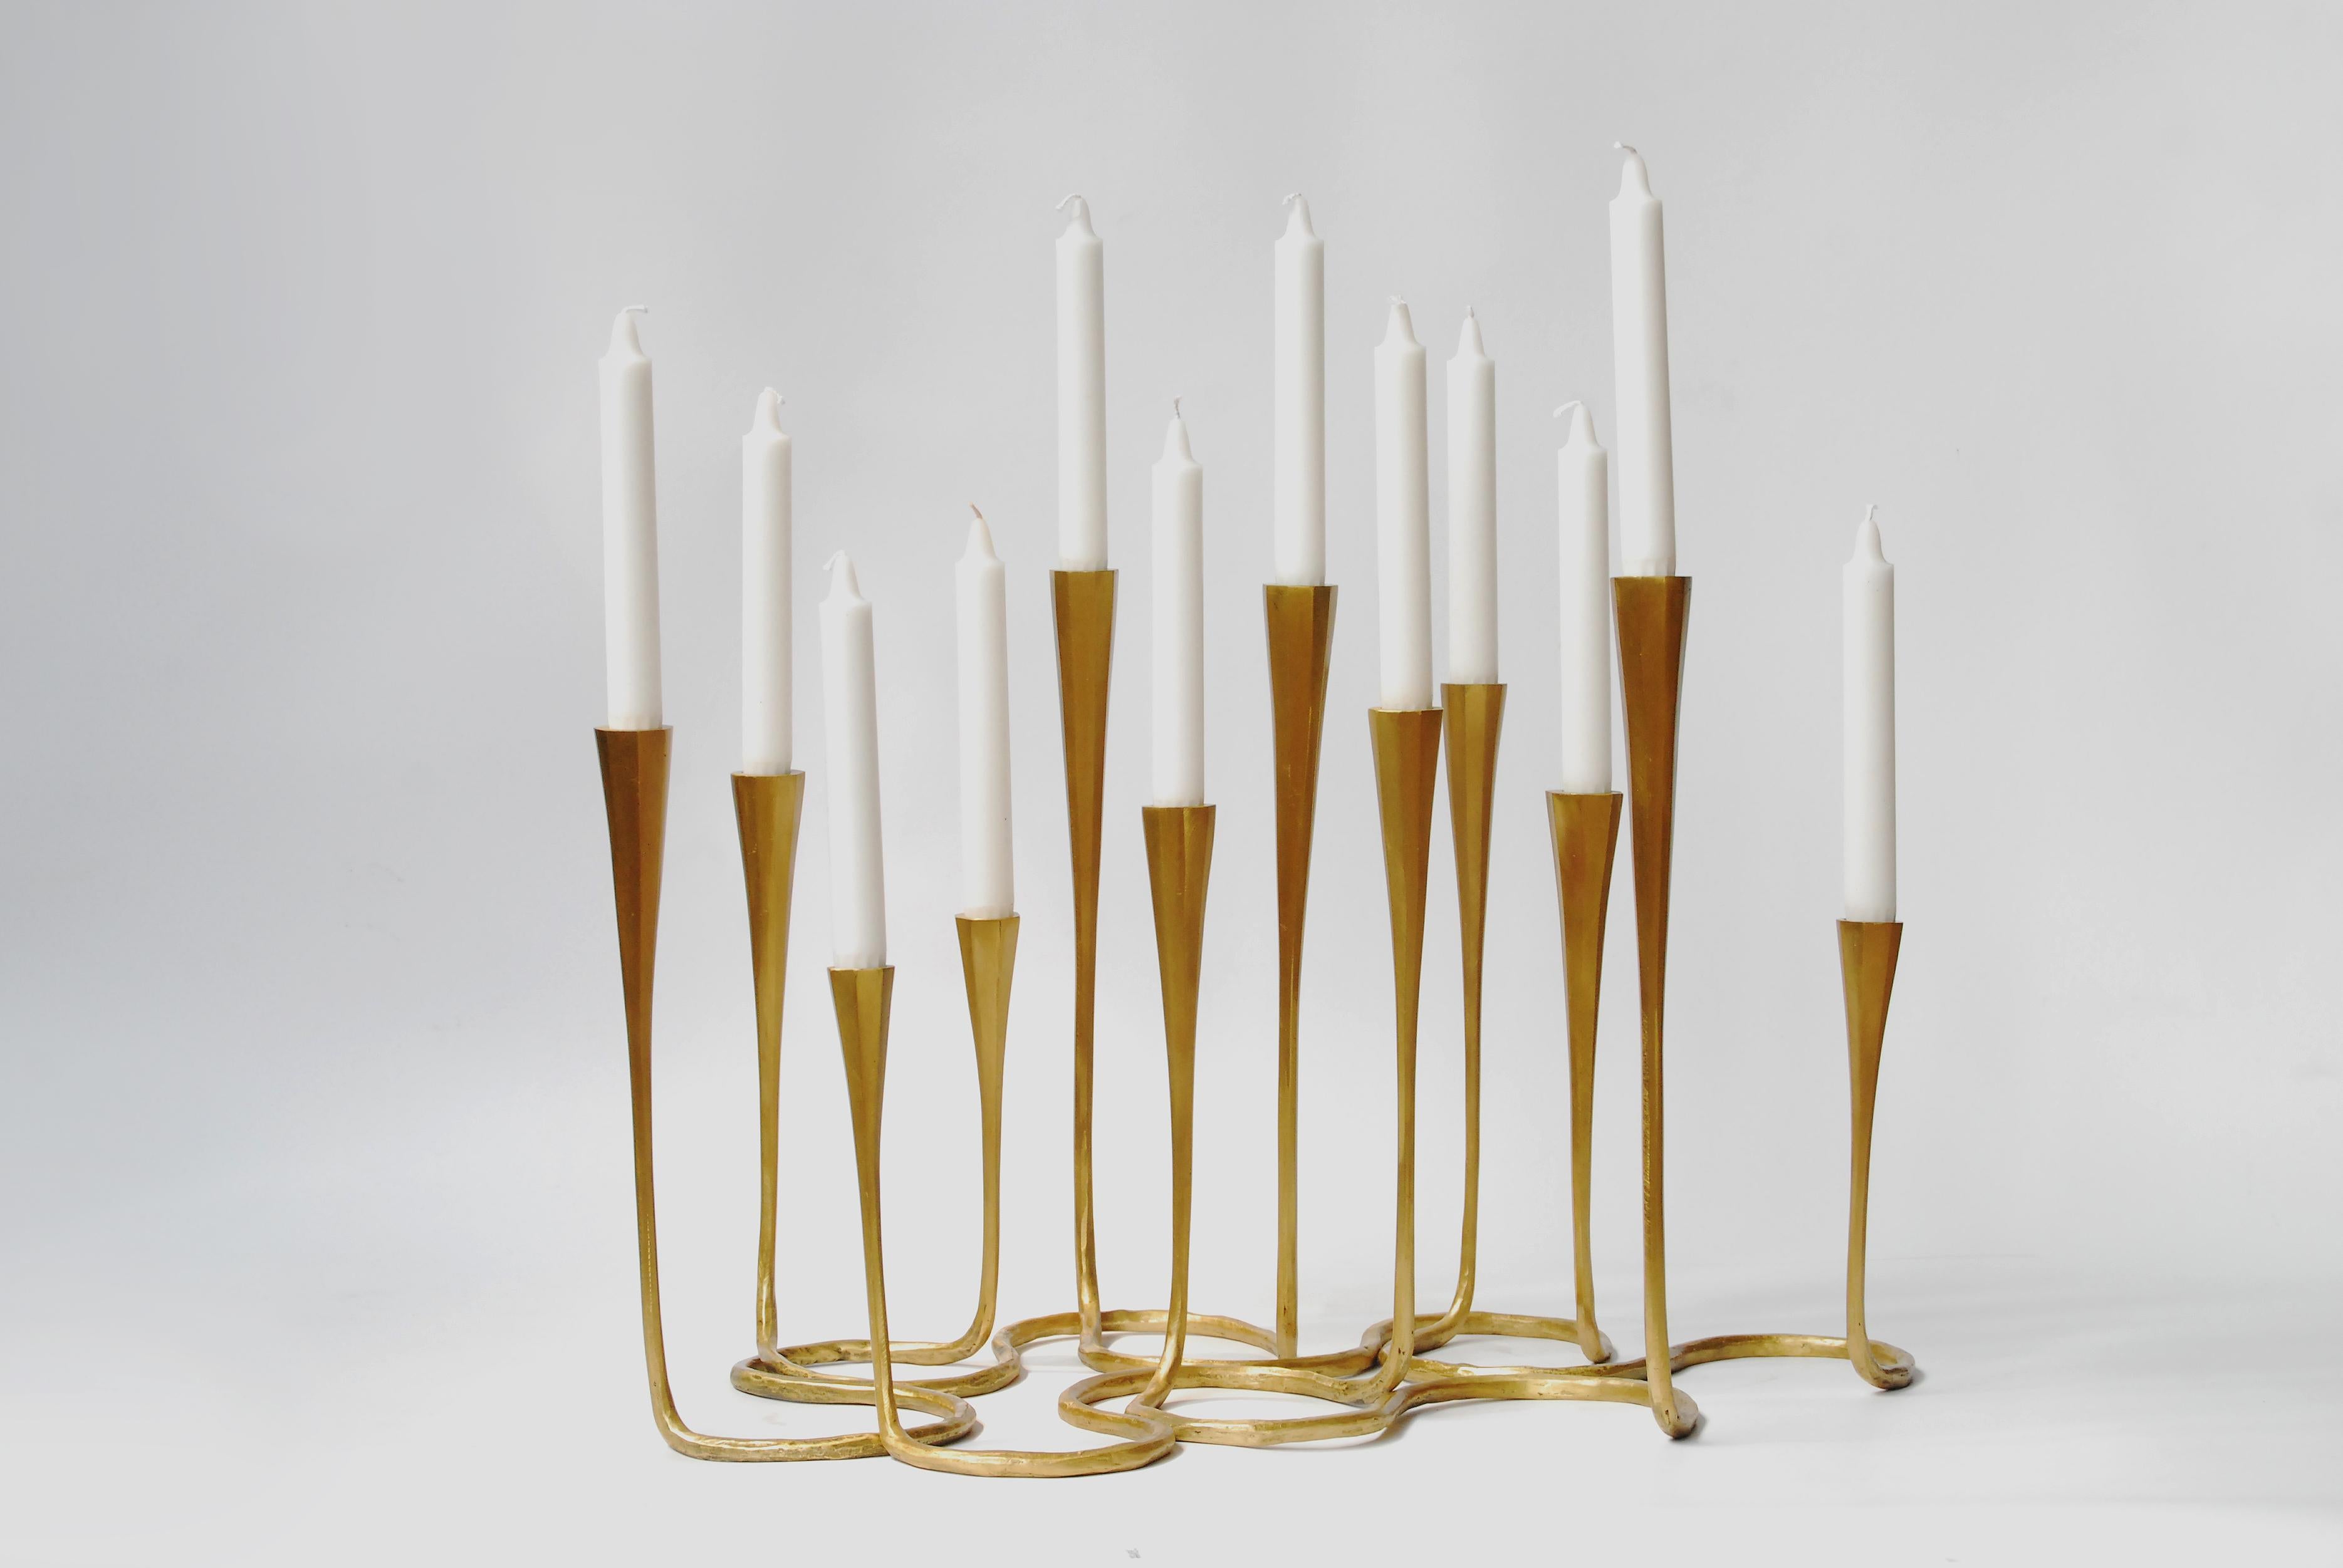 Gold bronze daisy candlestands are cast using the lost wax method. Each daisy comes as a set of two candlestands joined at the base. Combine several to create a stunning candlelit display on tabletops. Available in custom finishes and sizes by